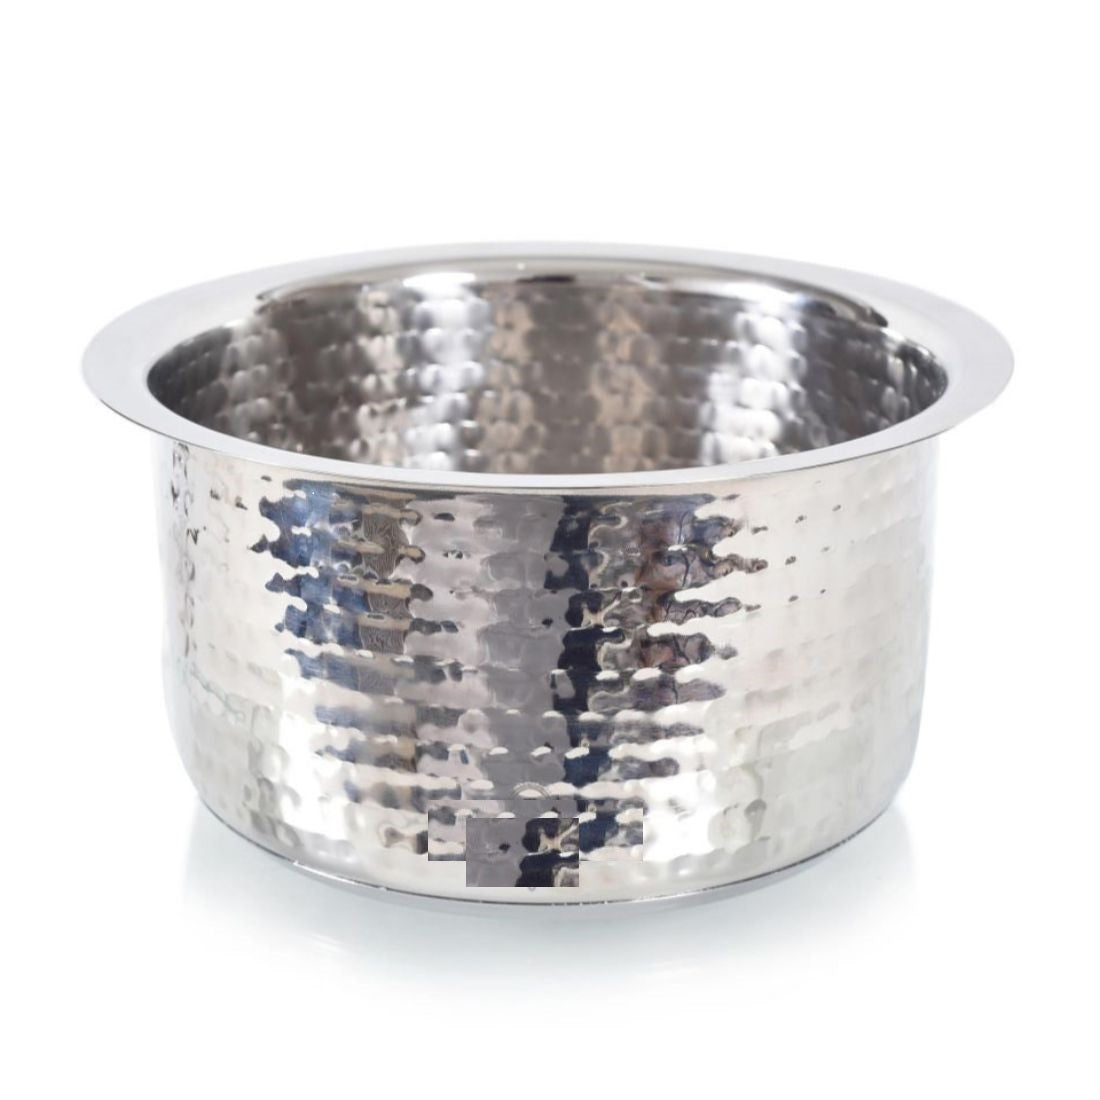 Aluminium Indian Hammered Deep Pot 5.5L With Lid No17 Round Heavy Duty 6256